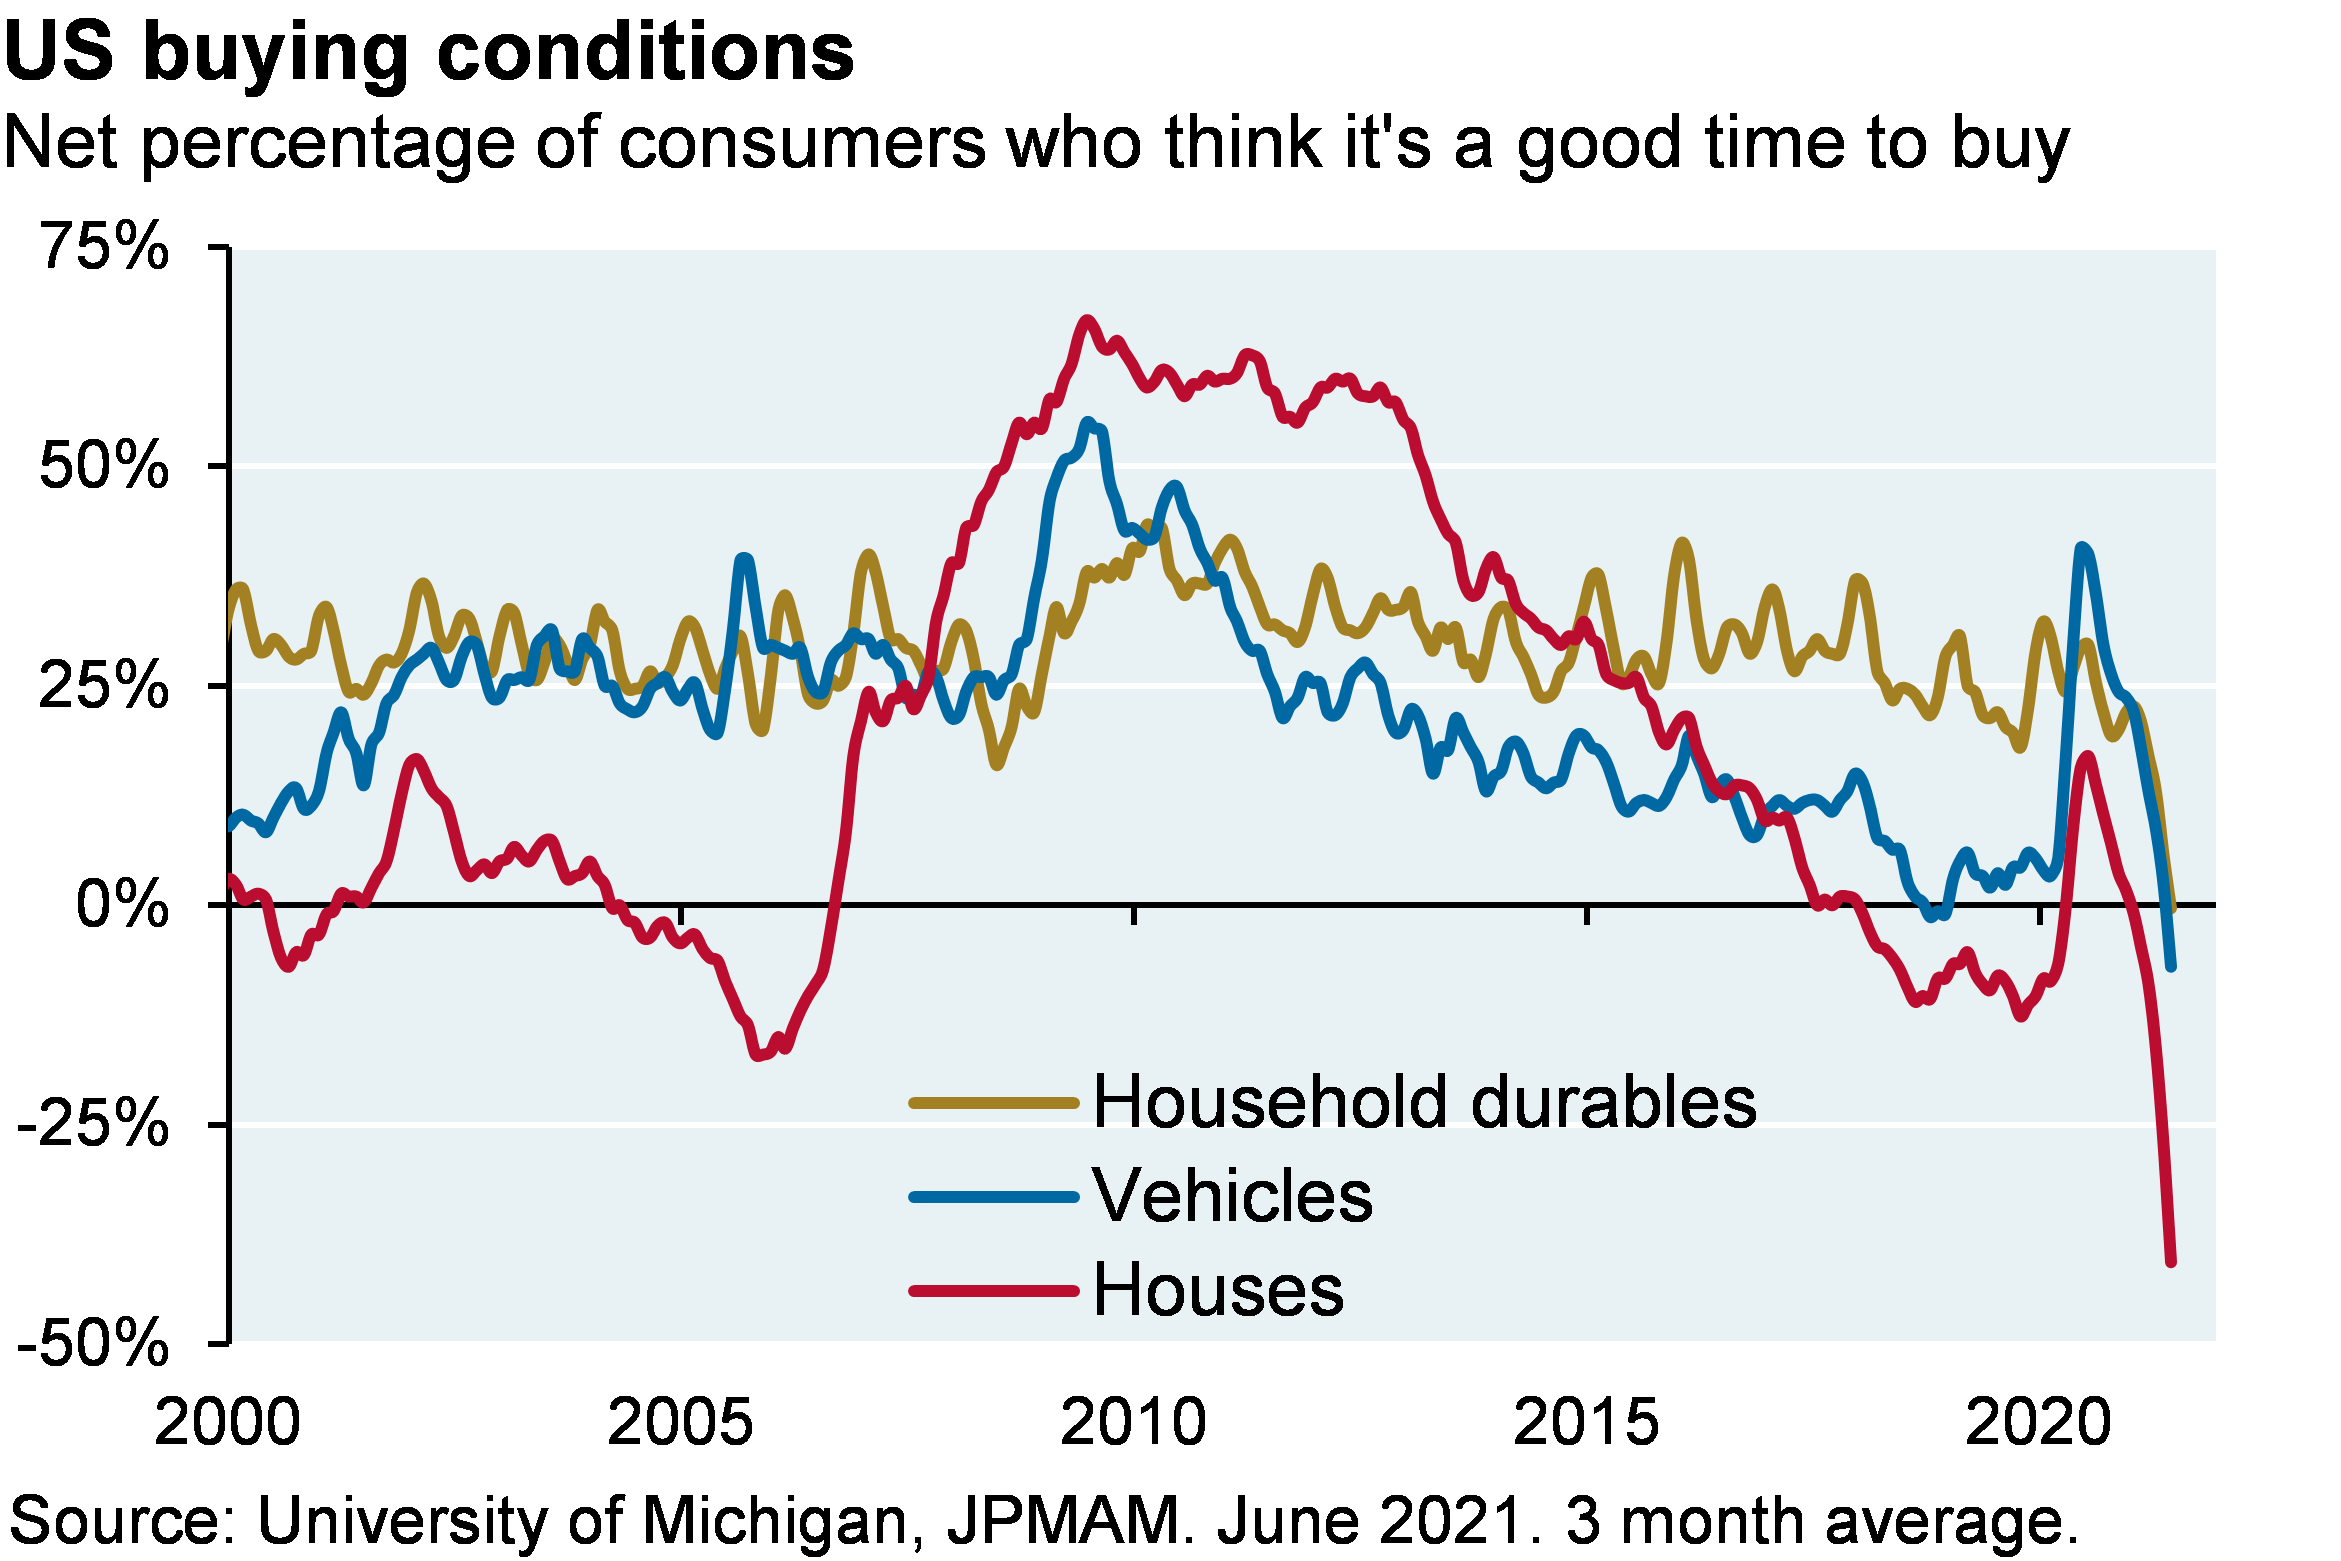 Line chart shows US buying conditions since 2000 for household durables, vehicles, and houses, shown as the net percentage of consumers who think it‚Äôs a good time to buy. US buying conditions for all series are close to their all-time lows. The net percentage of consumers who think it‚Äôs a good time to buy houses is close to -40%, compared to -7% for vehicles and 0% for household durables.